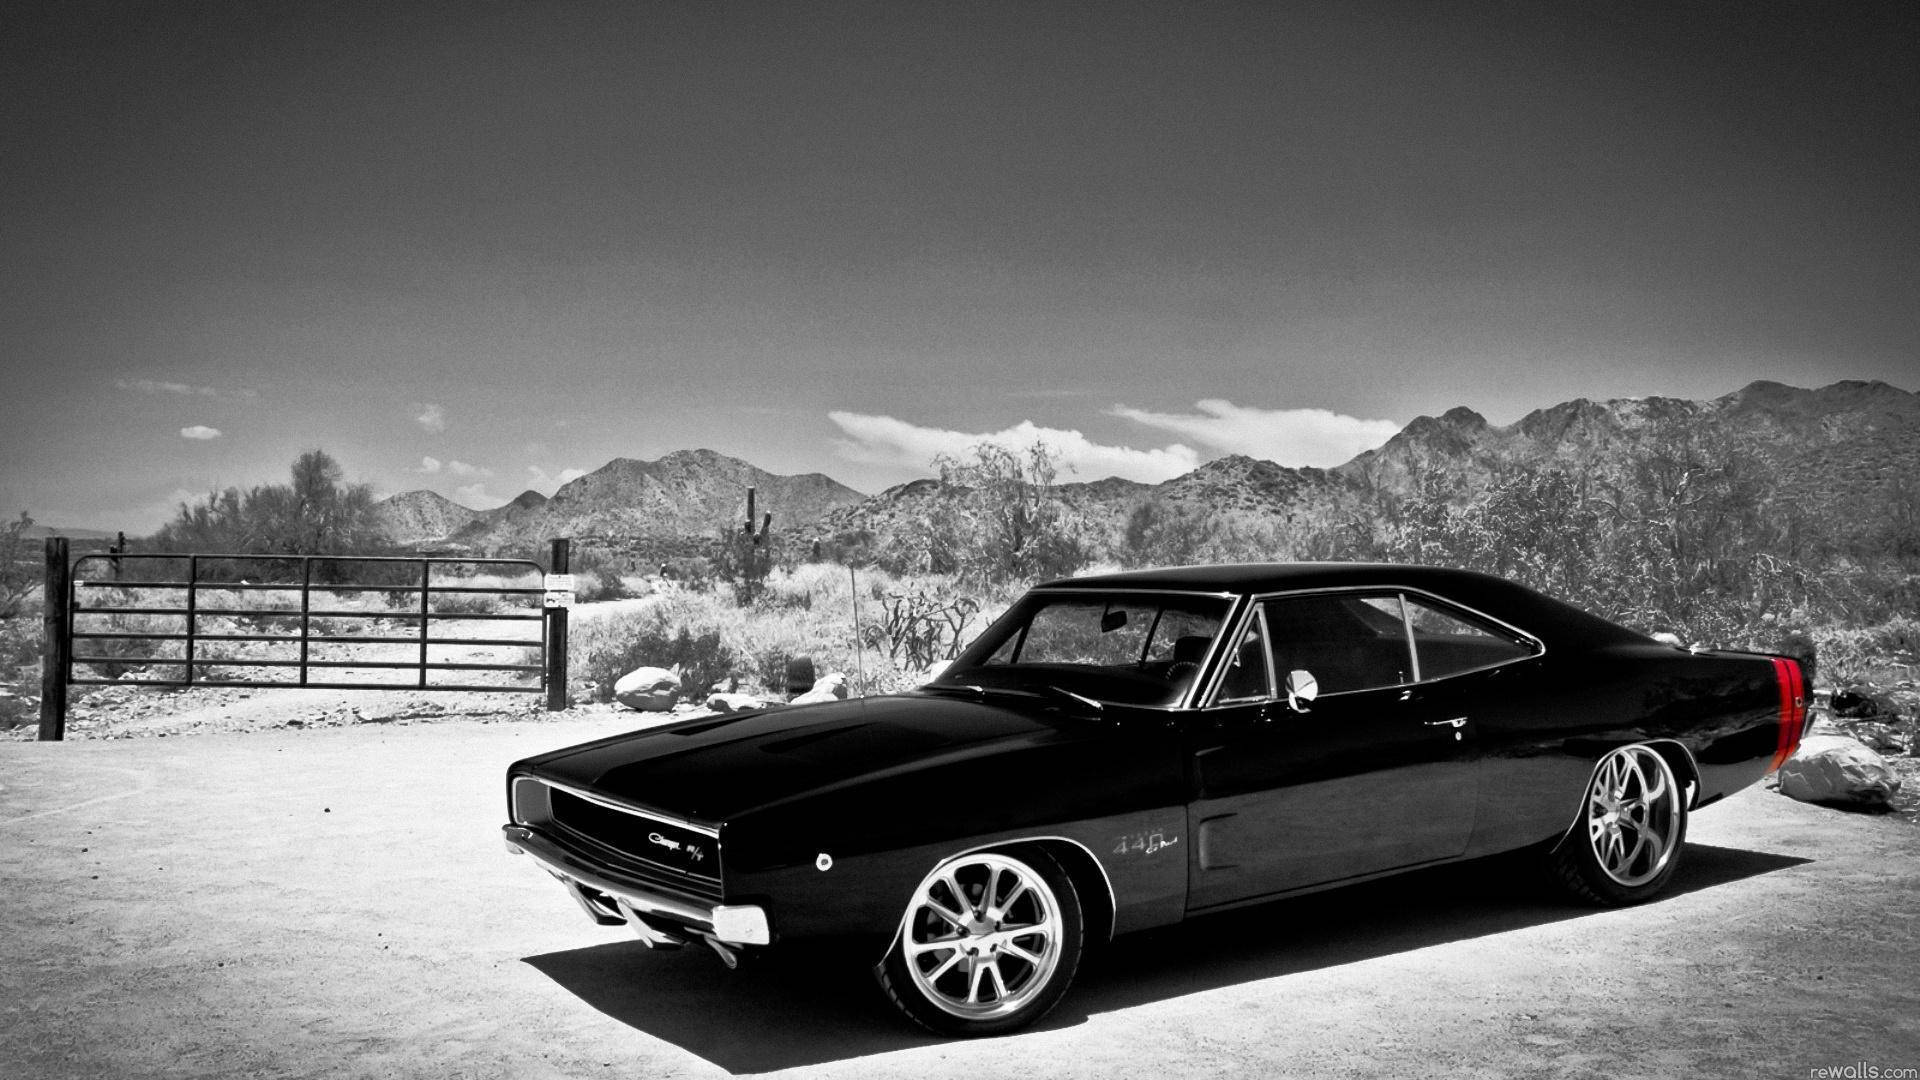 Caption: Stunning Black Muscle Car Background